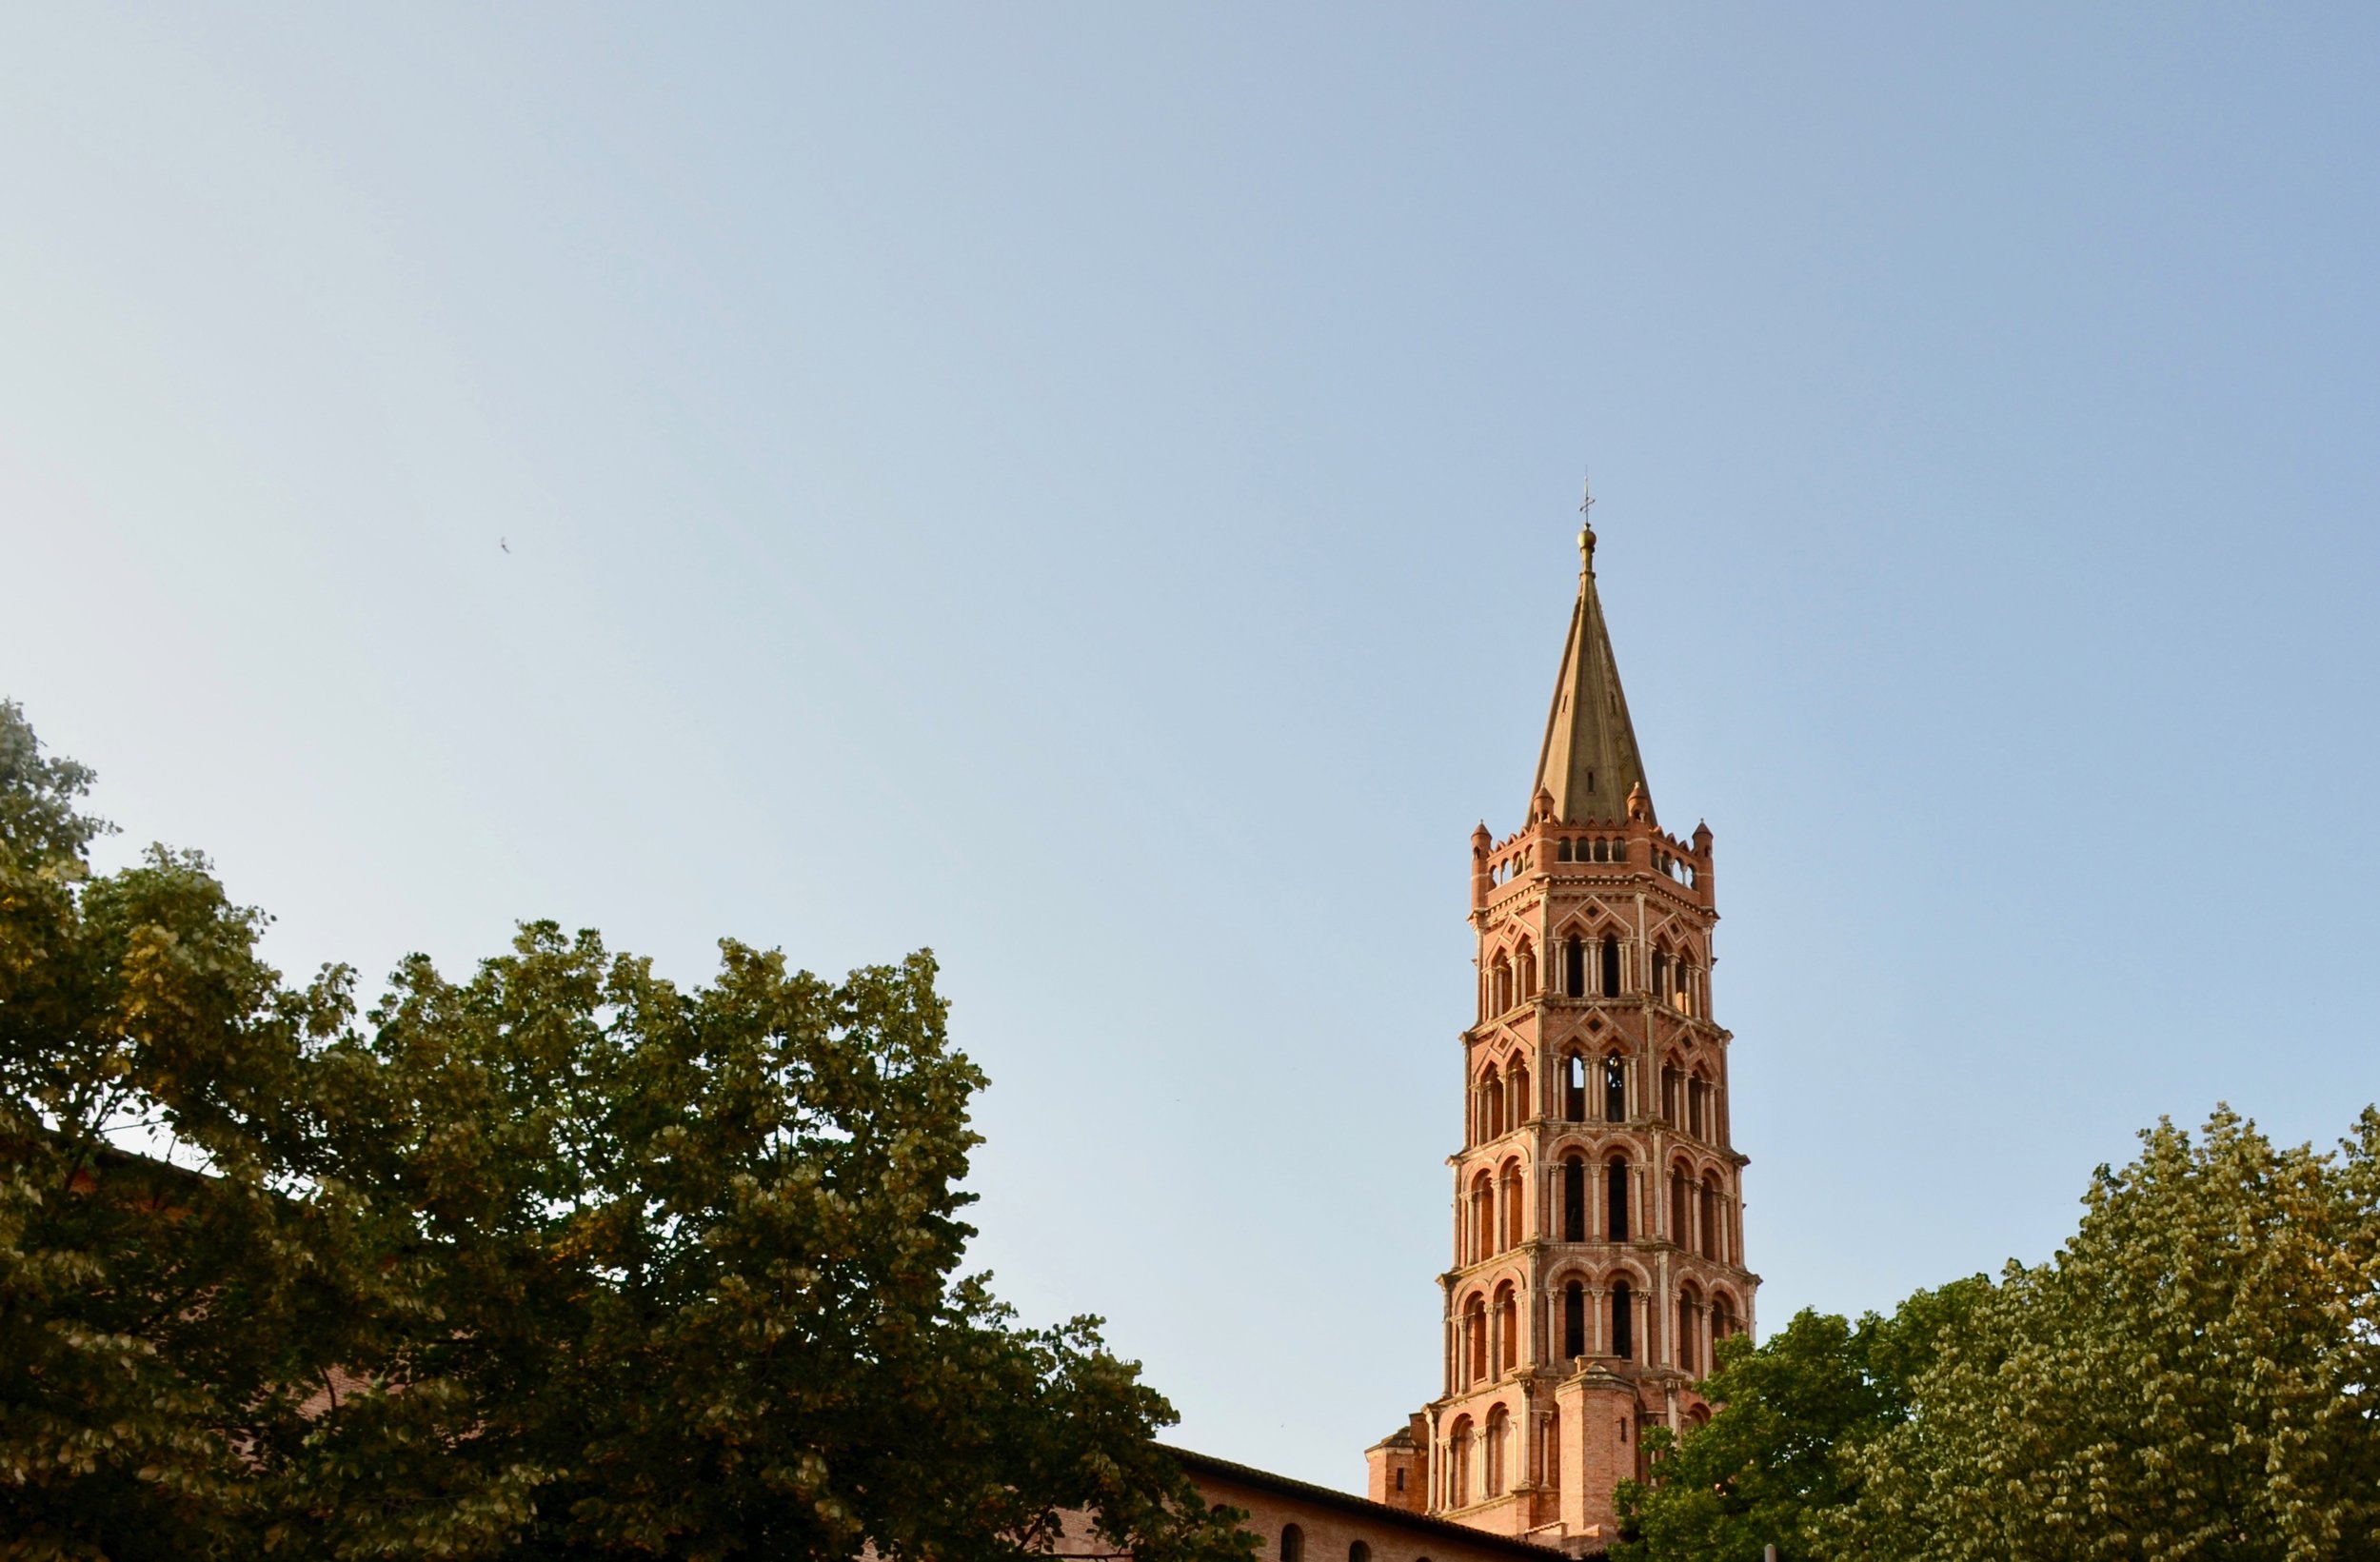 Tower of St-Sernin, Toulouse